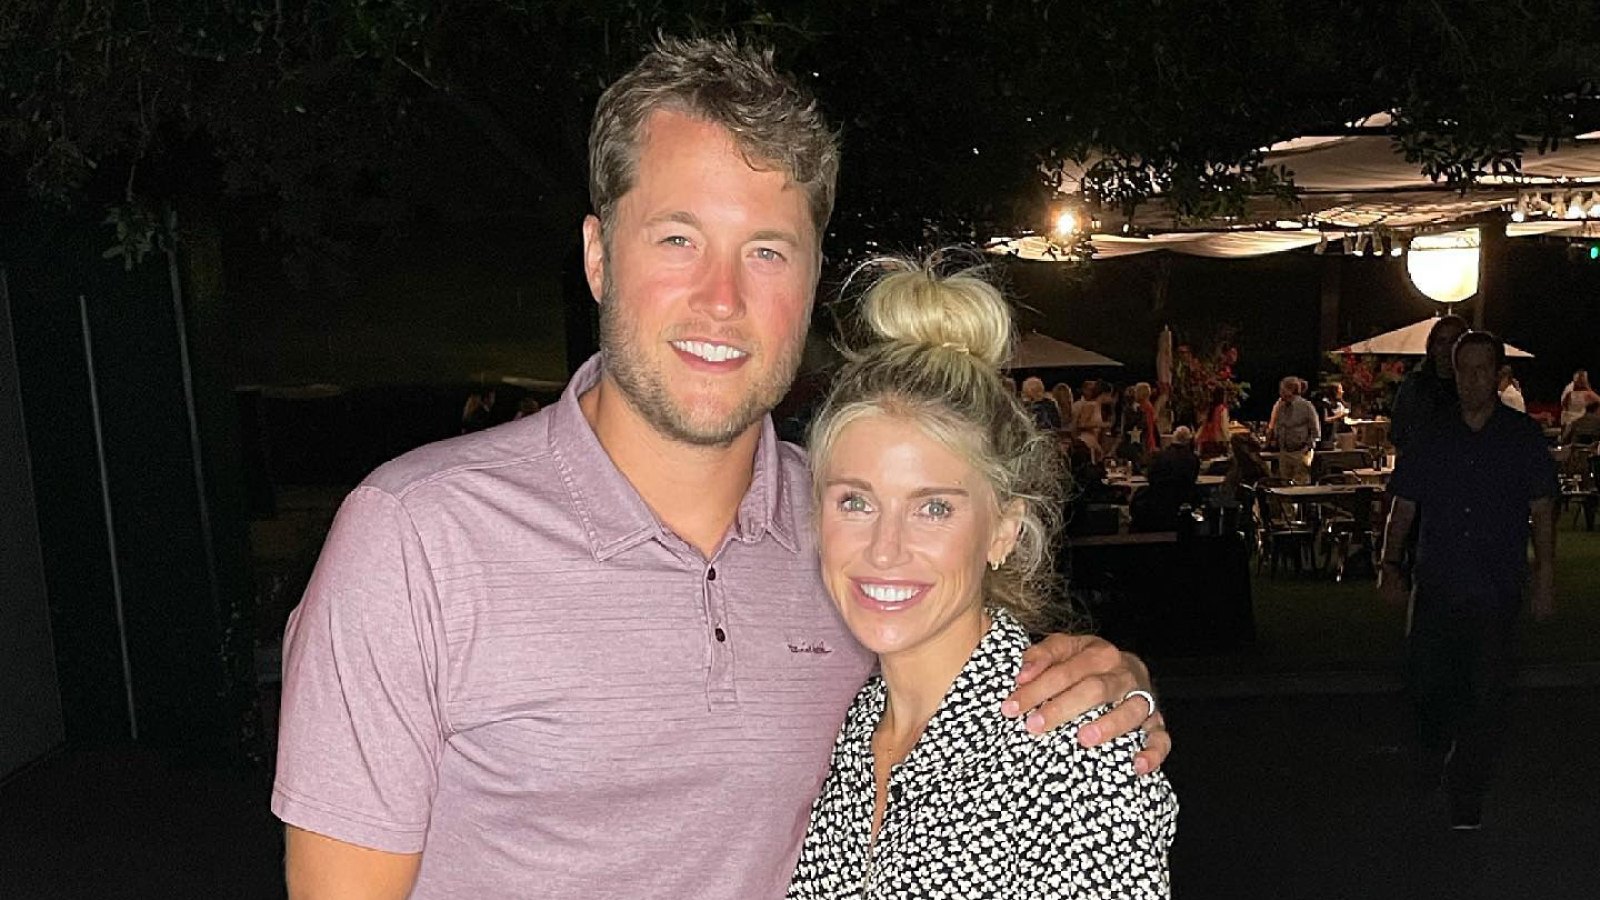 Gallery: Matt Stafford and Kelly Hall are Reportedly Engaged